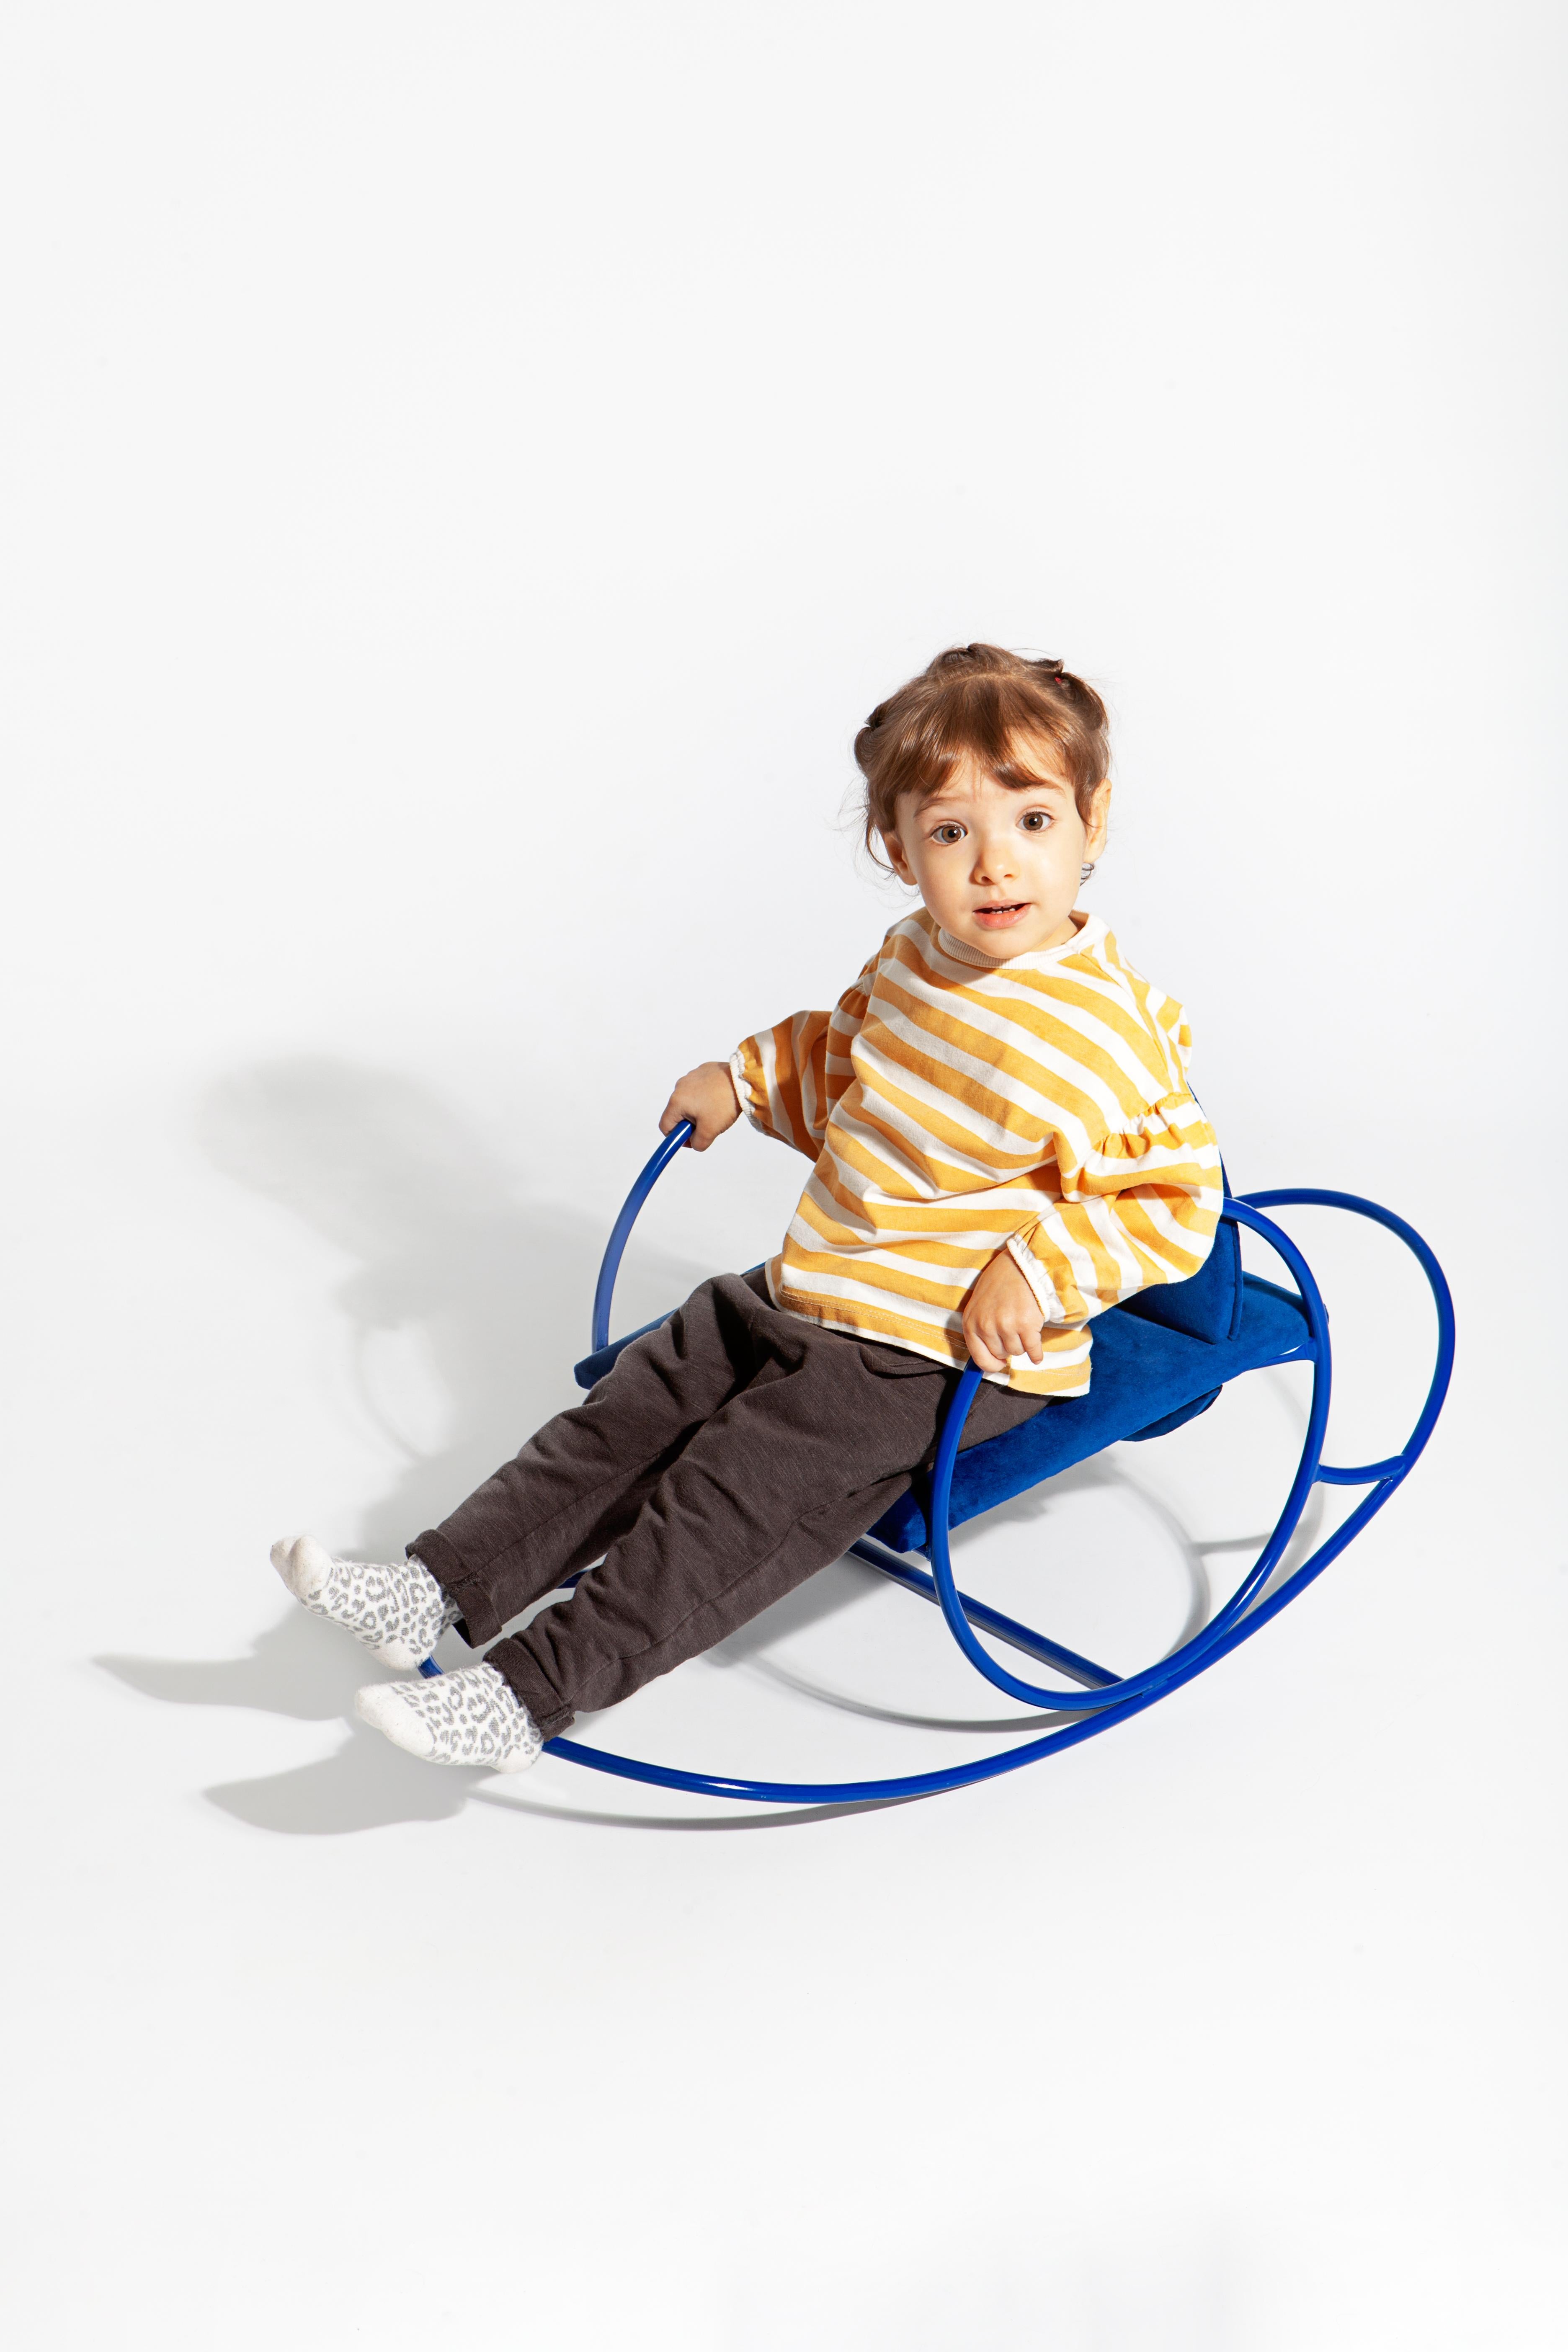 This tiny version of our Meneo Rocking Chair, was created inspired by 2-year-old designer's niece, Matilda. Our furniture pieces are playful and we like kids enjoying them.

Pieces are handcrafted individually in small workshops in Madrid. Any